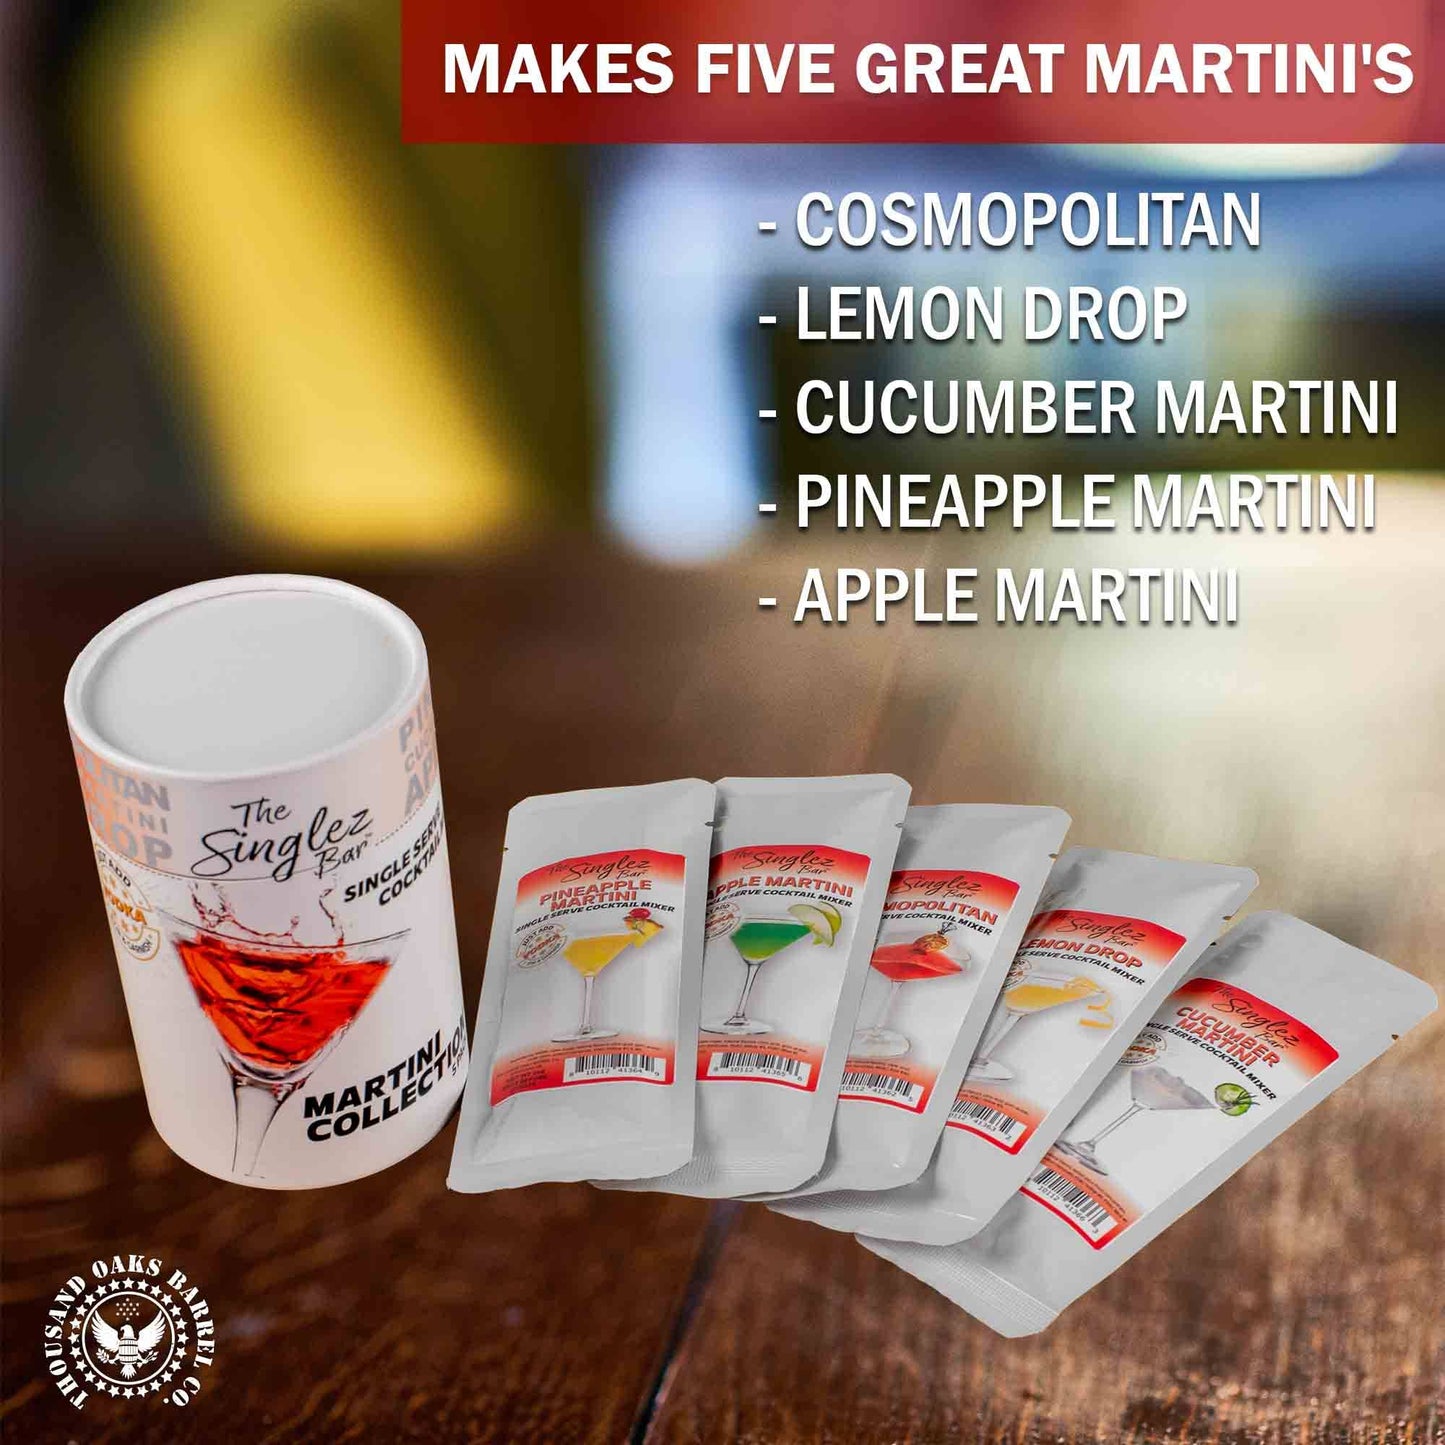 Martini Collection- 5-Pack Single Serve Mixers